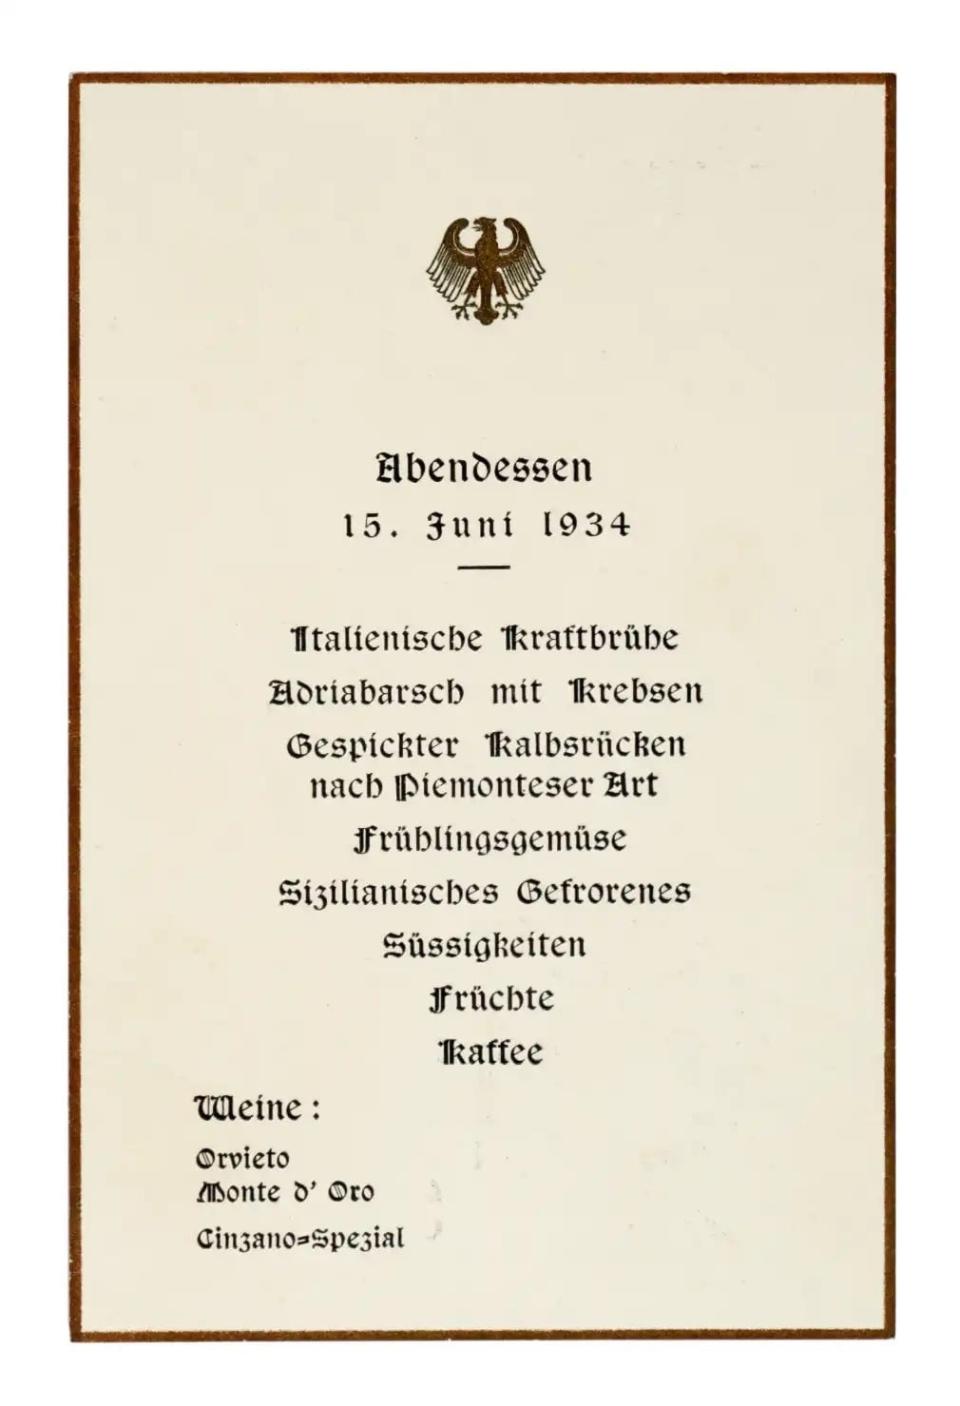 The menu from Adolf Hitler and Benito Mussolini's first meal and meeting together, on June 15, 1934. Written in German, it features Italian cuisine, from Adriatic crabs to Piedmontese beef.